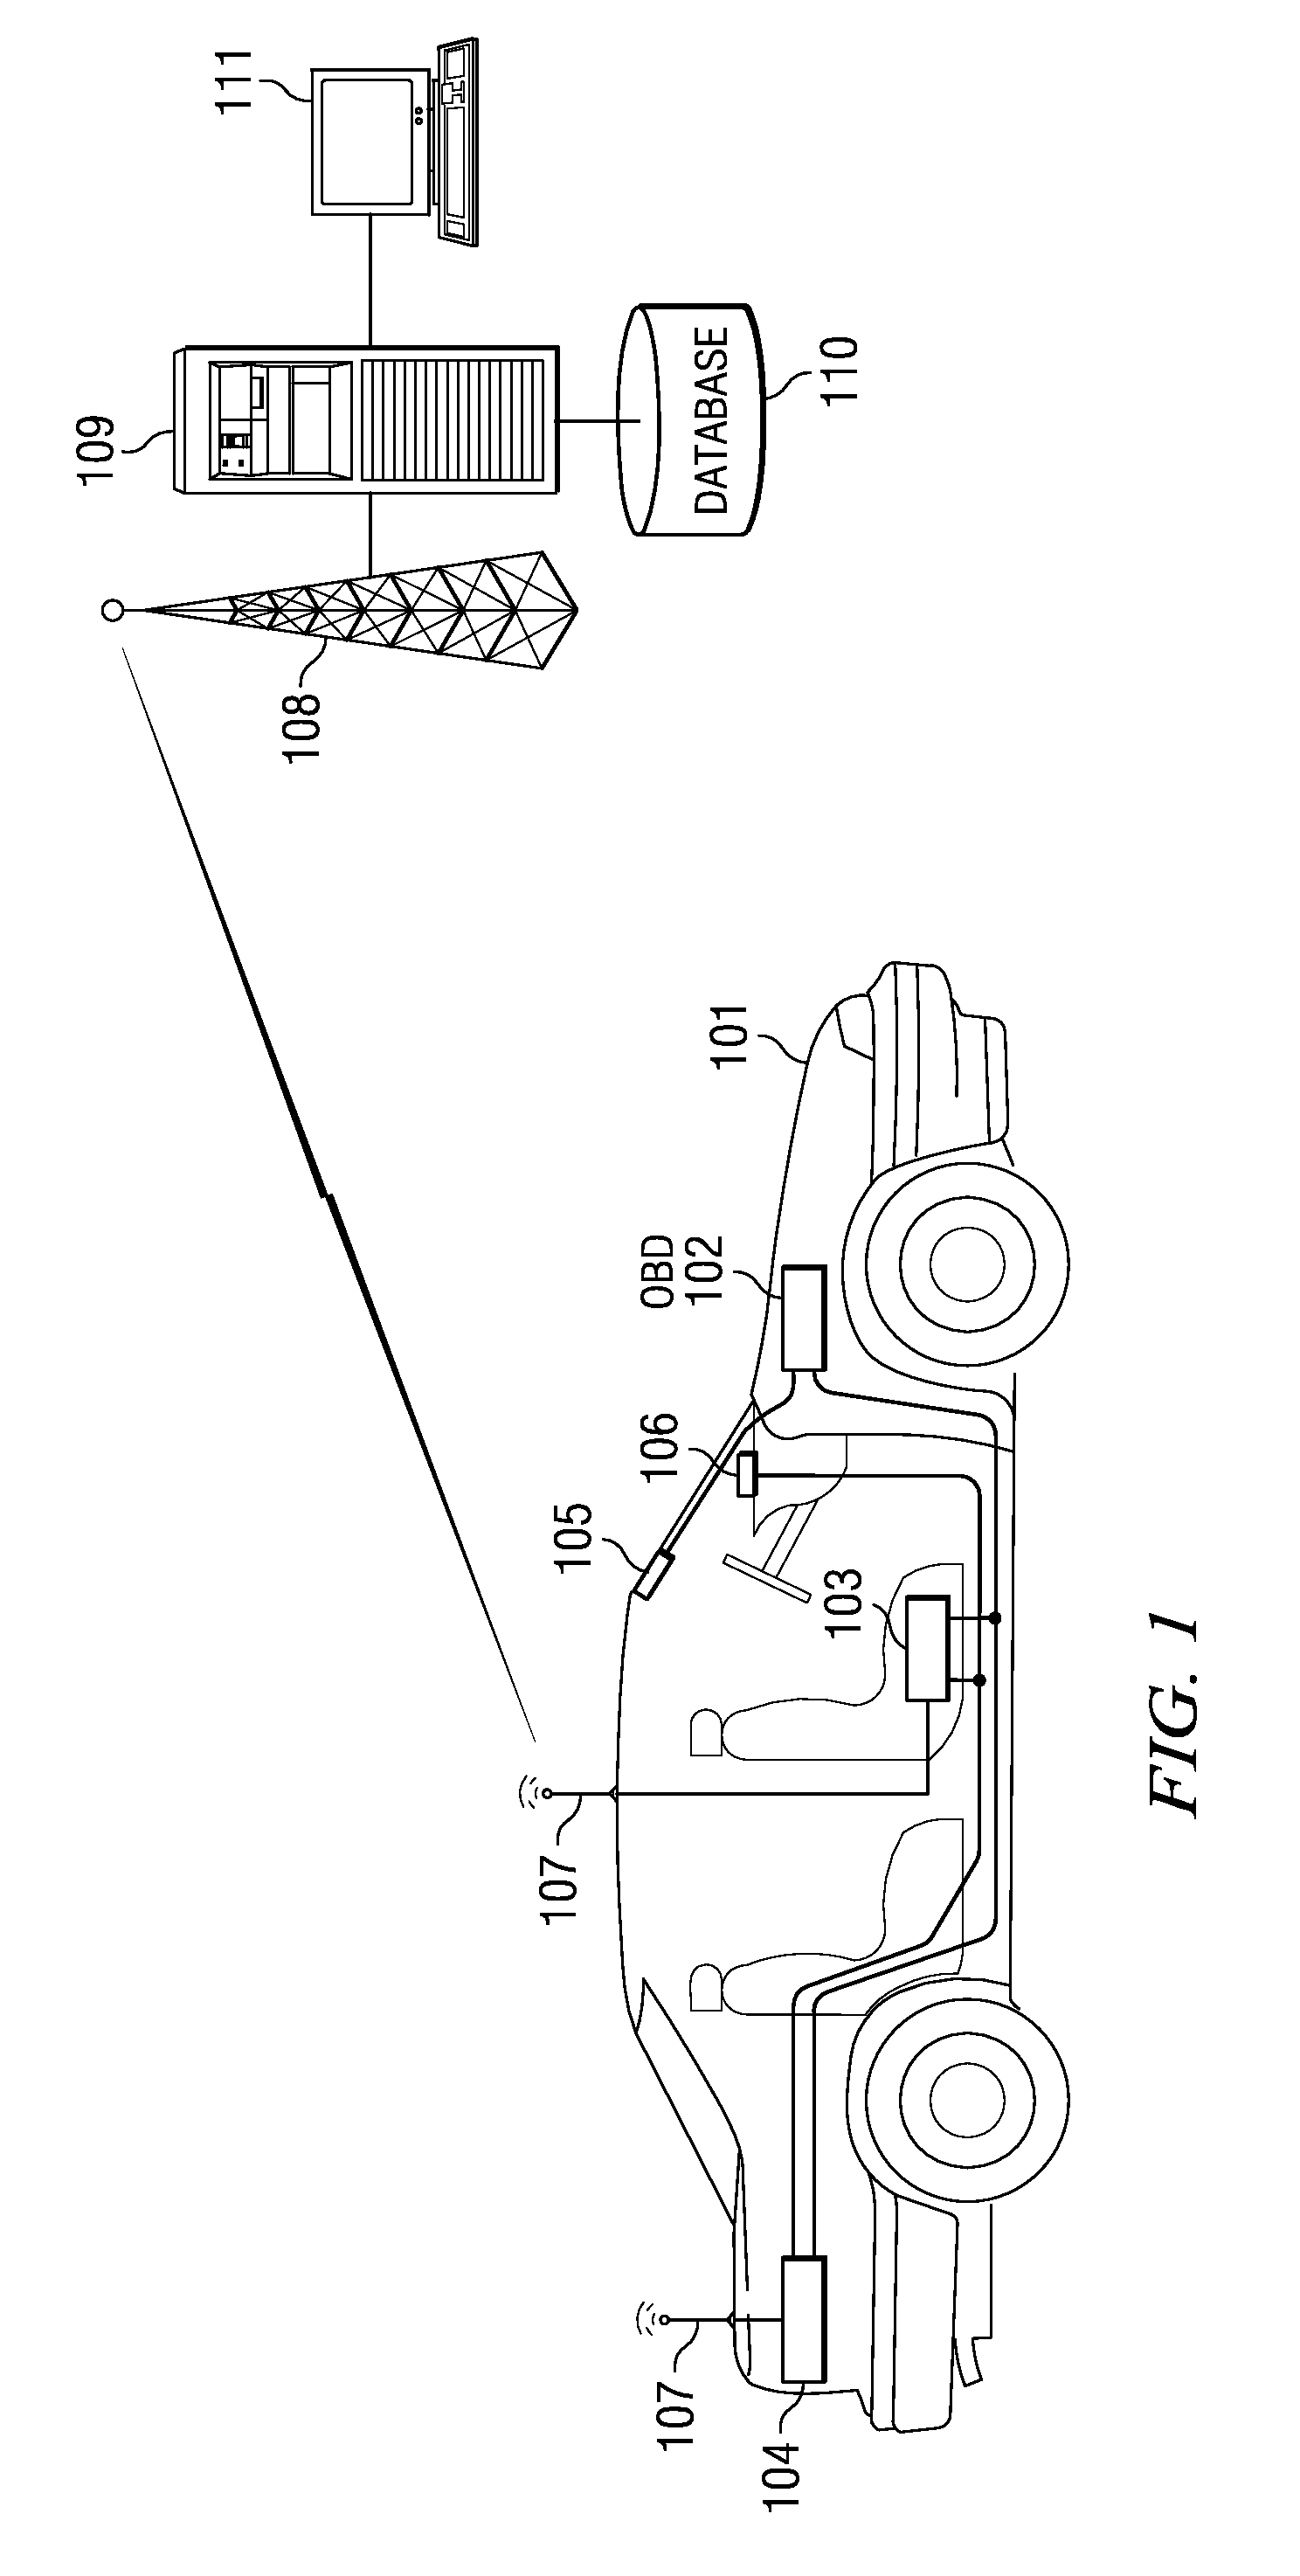 System and method for naming, filtering, and recall of remotely monitored event data